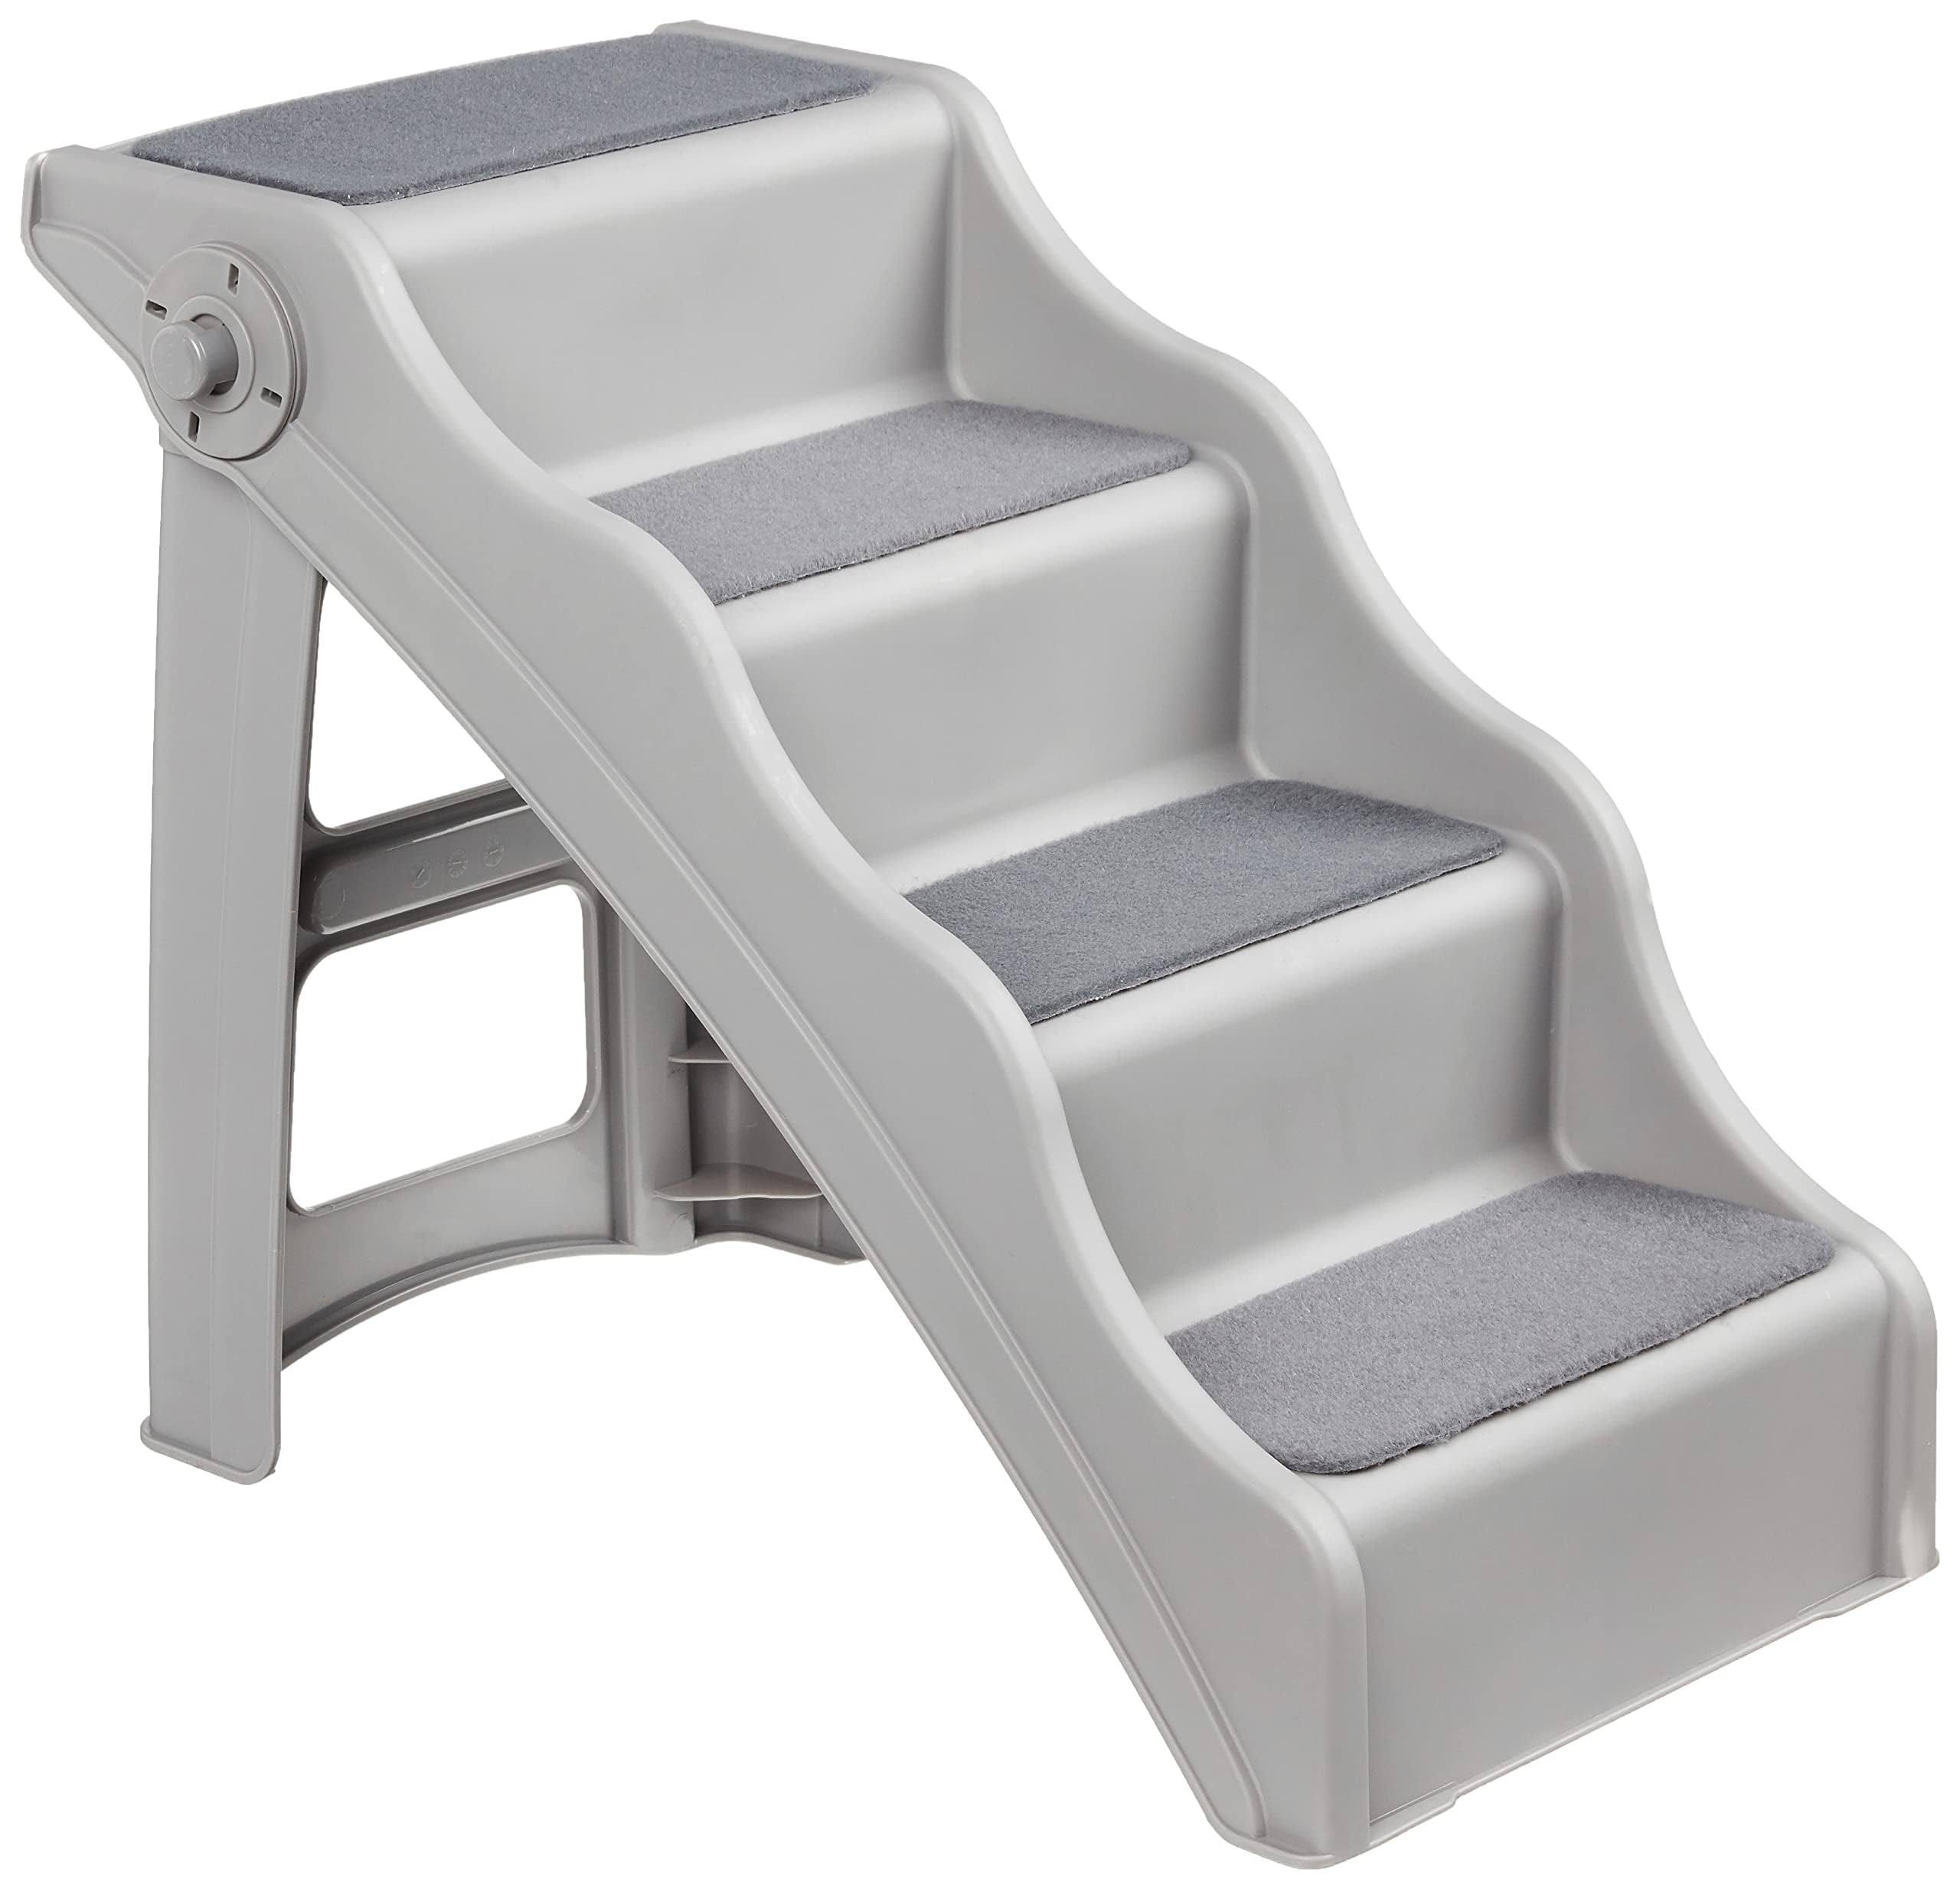 Amazon Basics Foldable Pet Stairs for Dogs and Cats | Image